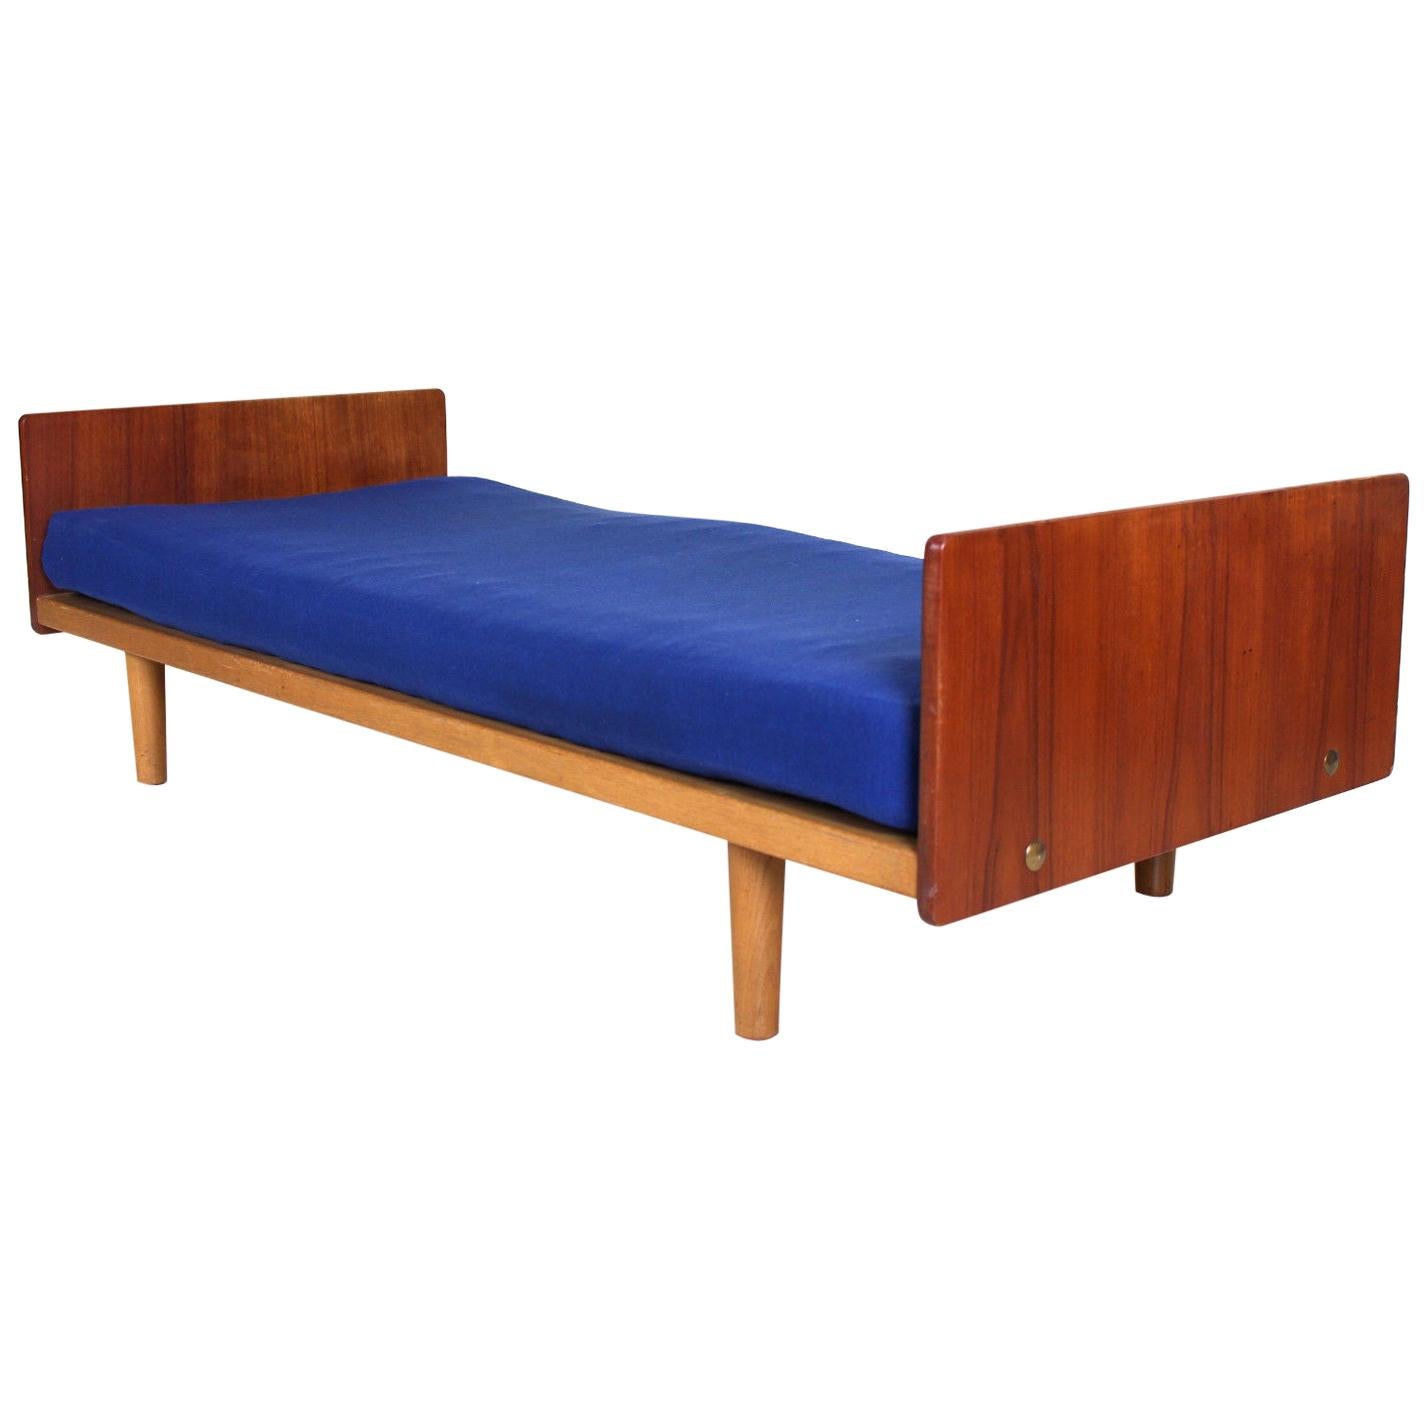 Vintage Danish Daybed Studio Couch Teak Day Sofa Bed For Sale